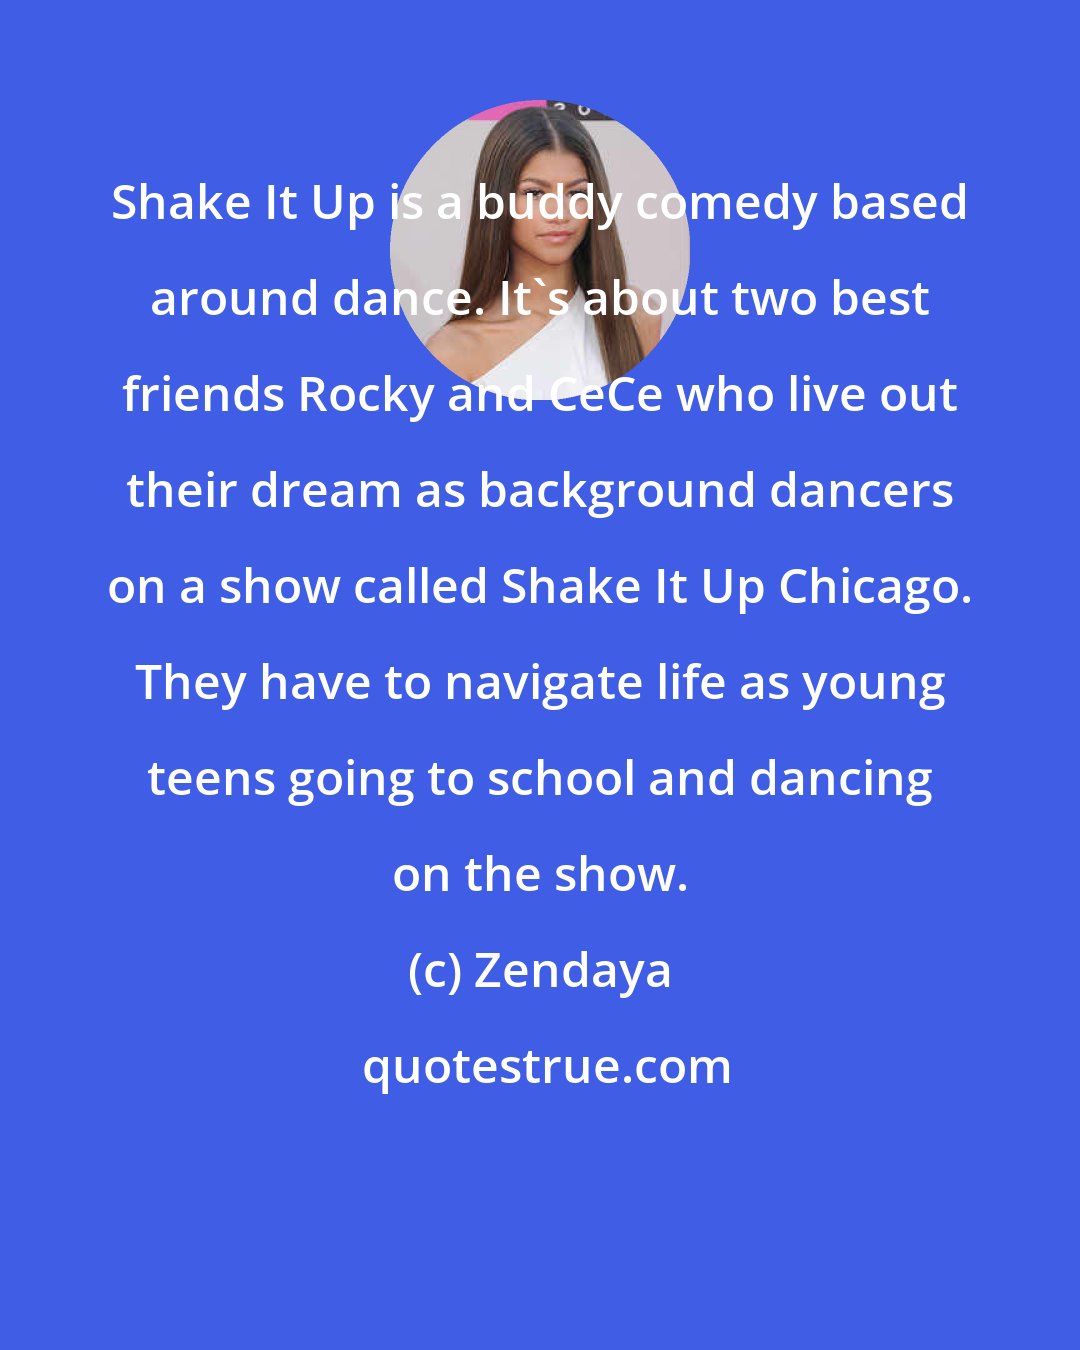 Zendaya: Shake It Up is a buddy comedy based around dance. It's about two best friends Rocky and CeCe who live out their dream as background dancers on a show called Shake It Up Chicago. They have to navigate life as young teens going to school and dancing on the show.